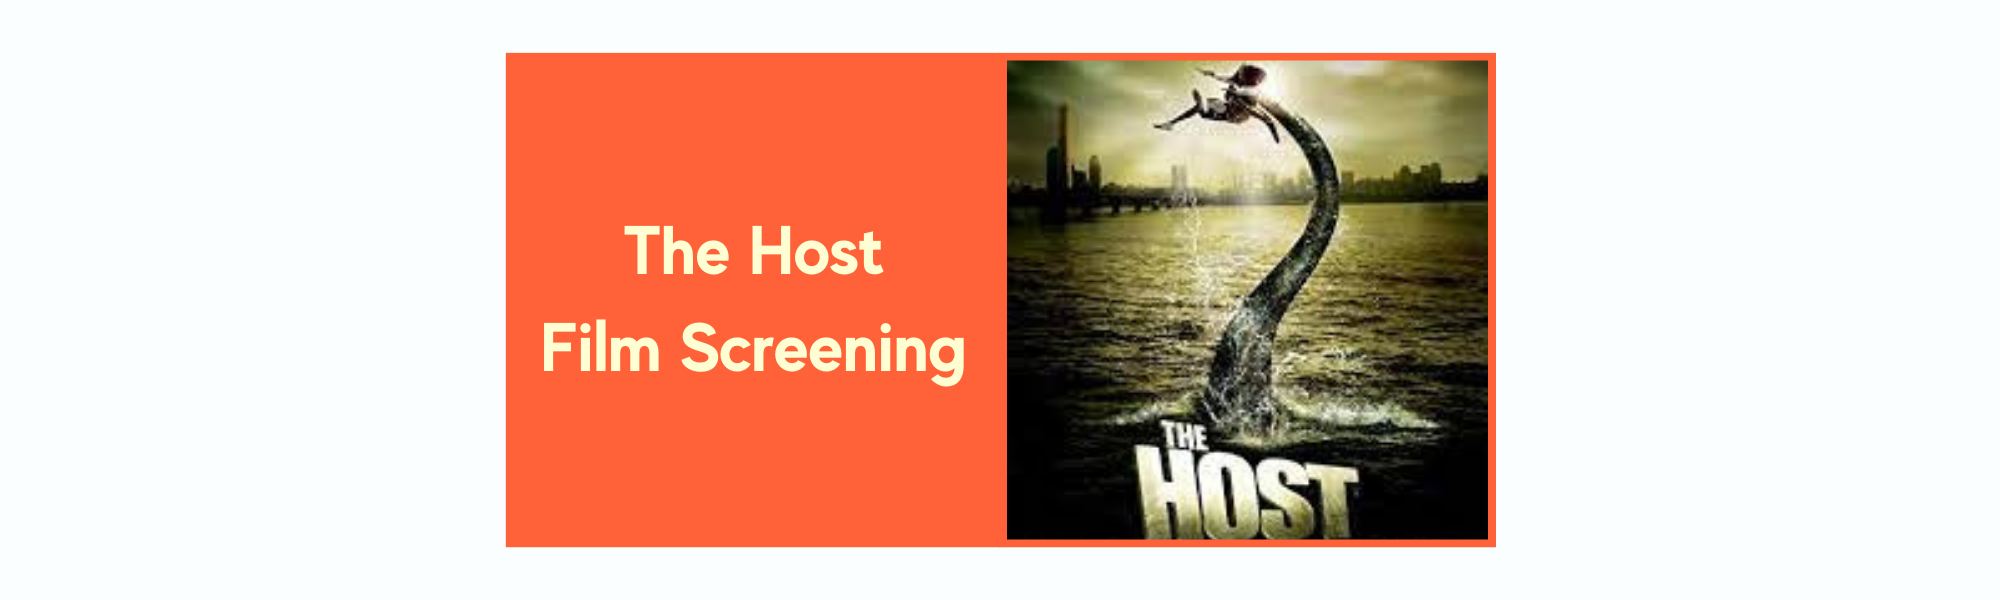 The-Host-Film-Screening.png